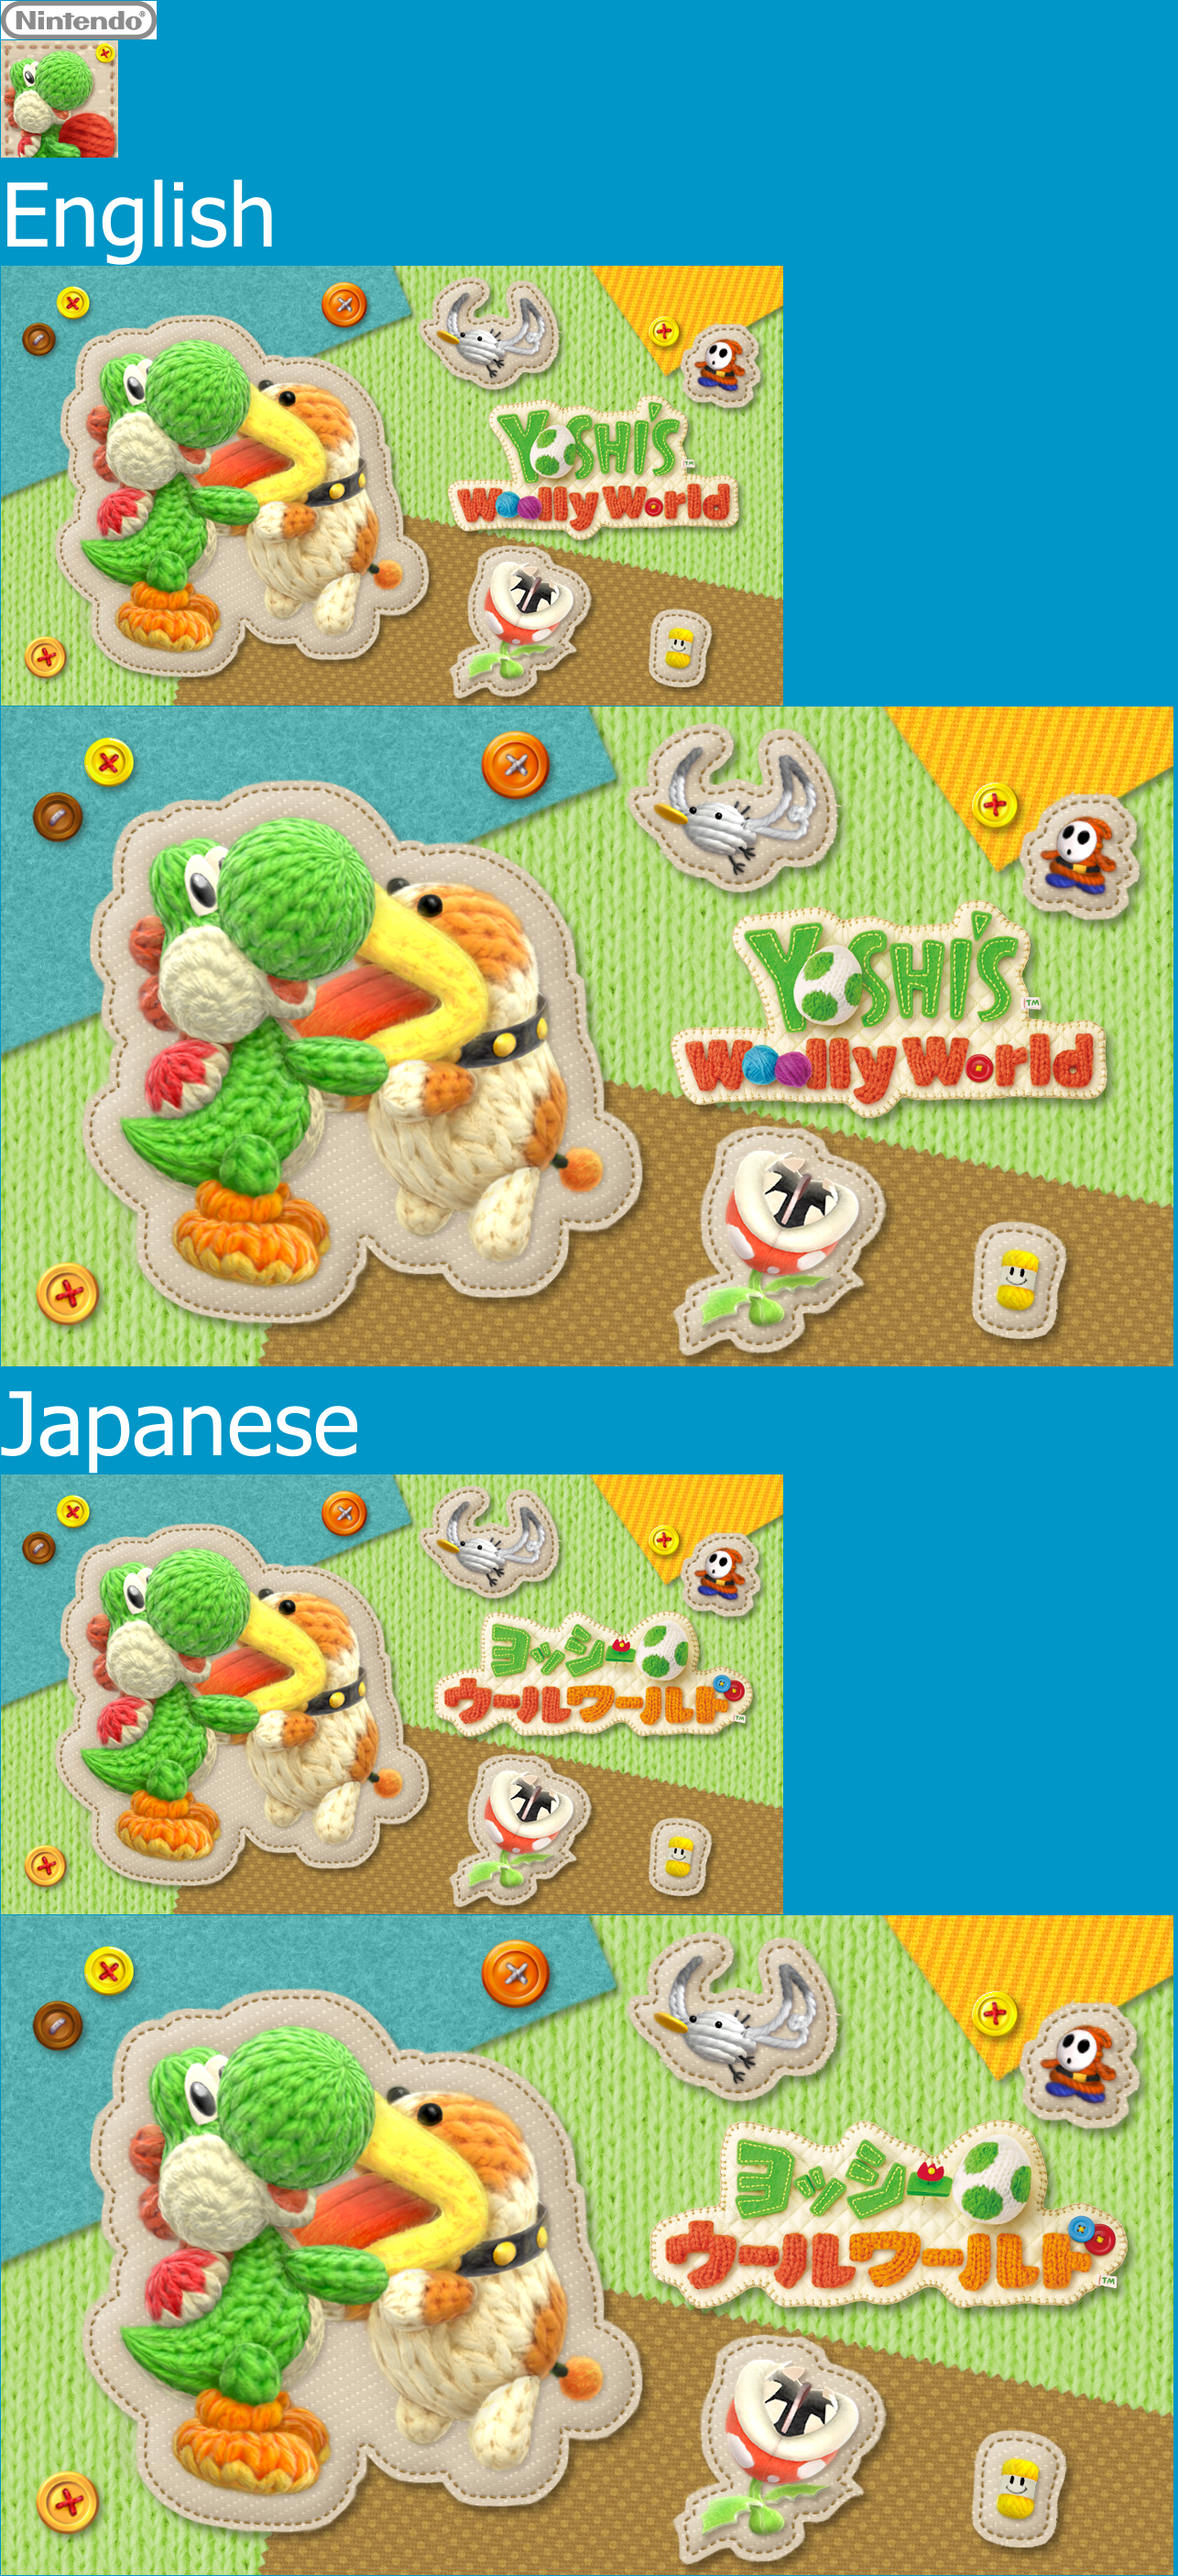 Yoshi's Woolly World - Banners and HOME Menu Icon